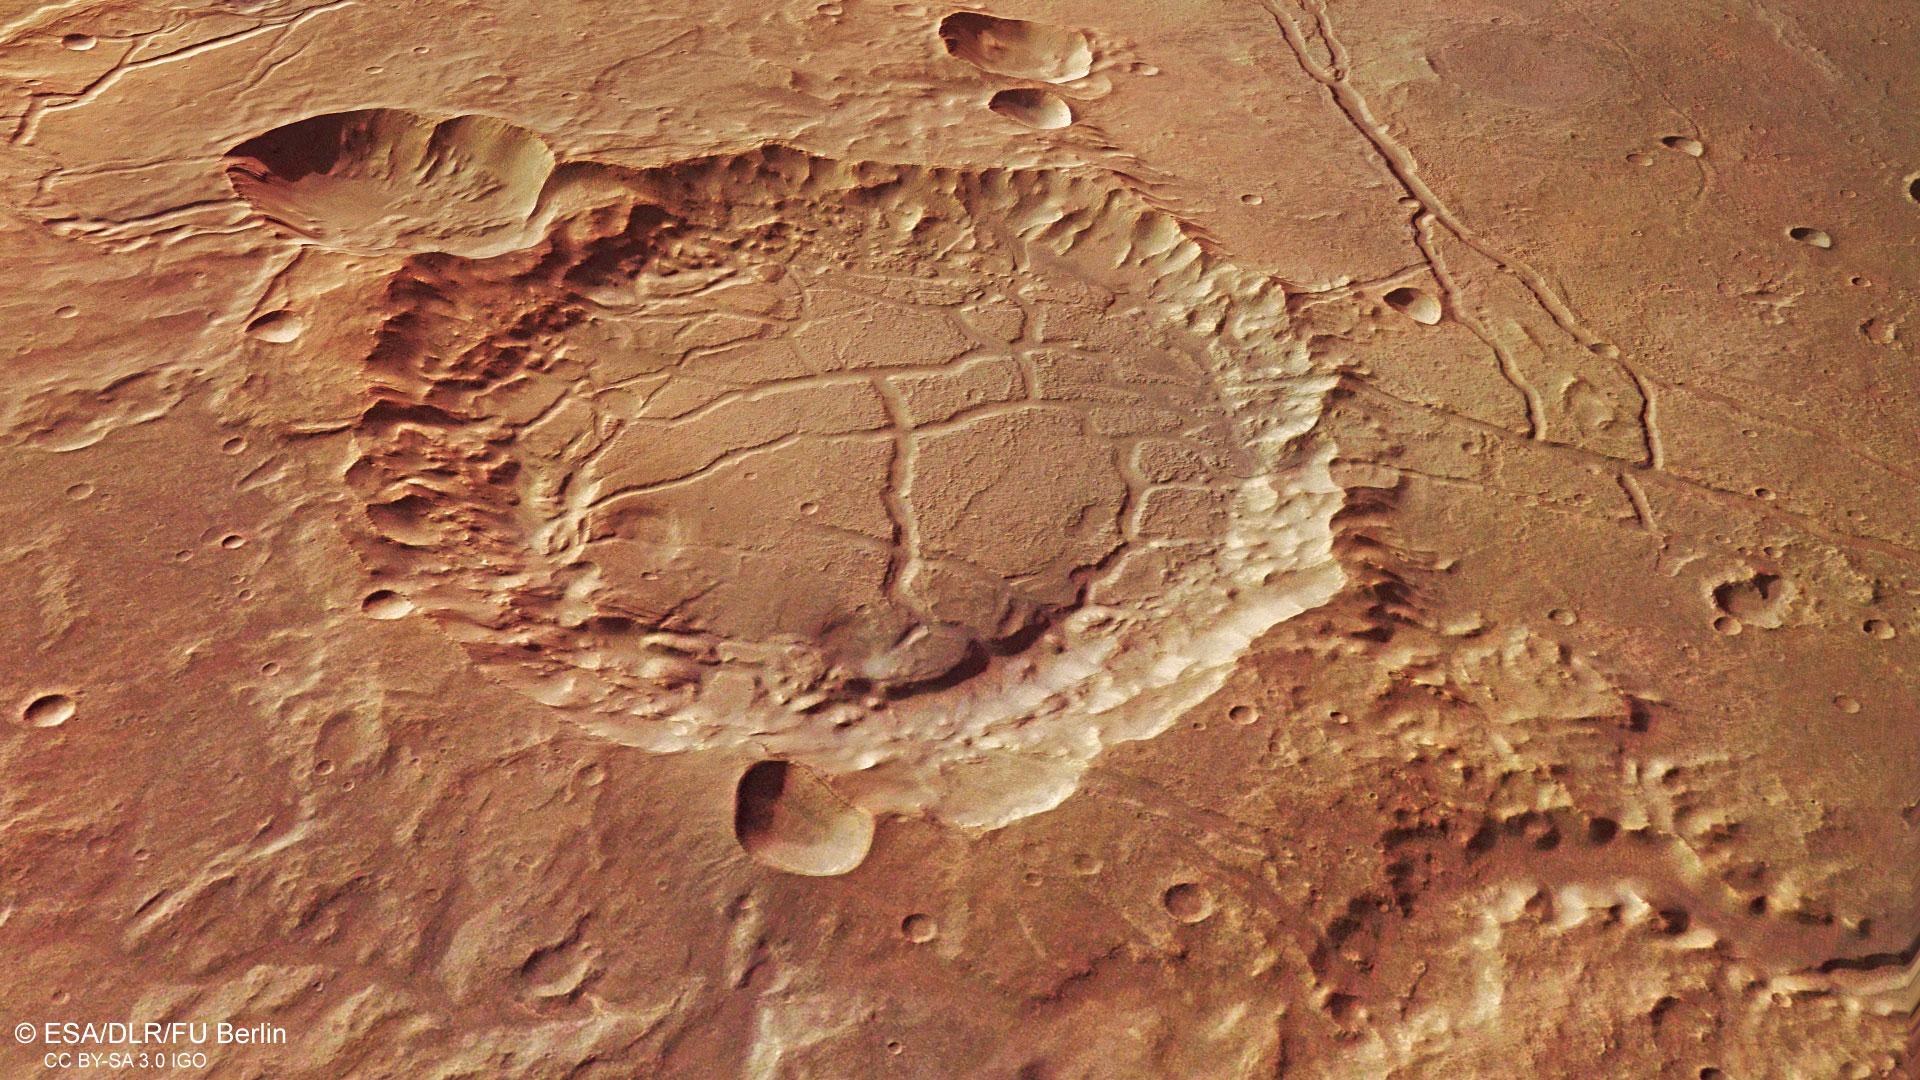 Oblique perspective view of a crater filled with sediment